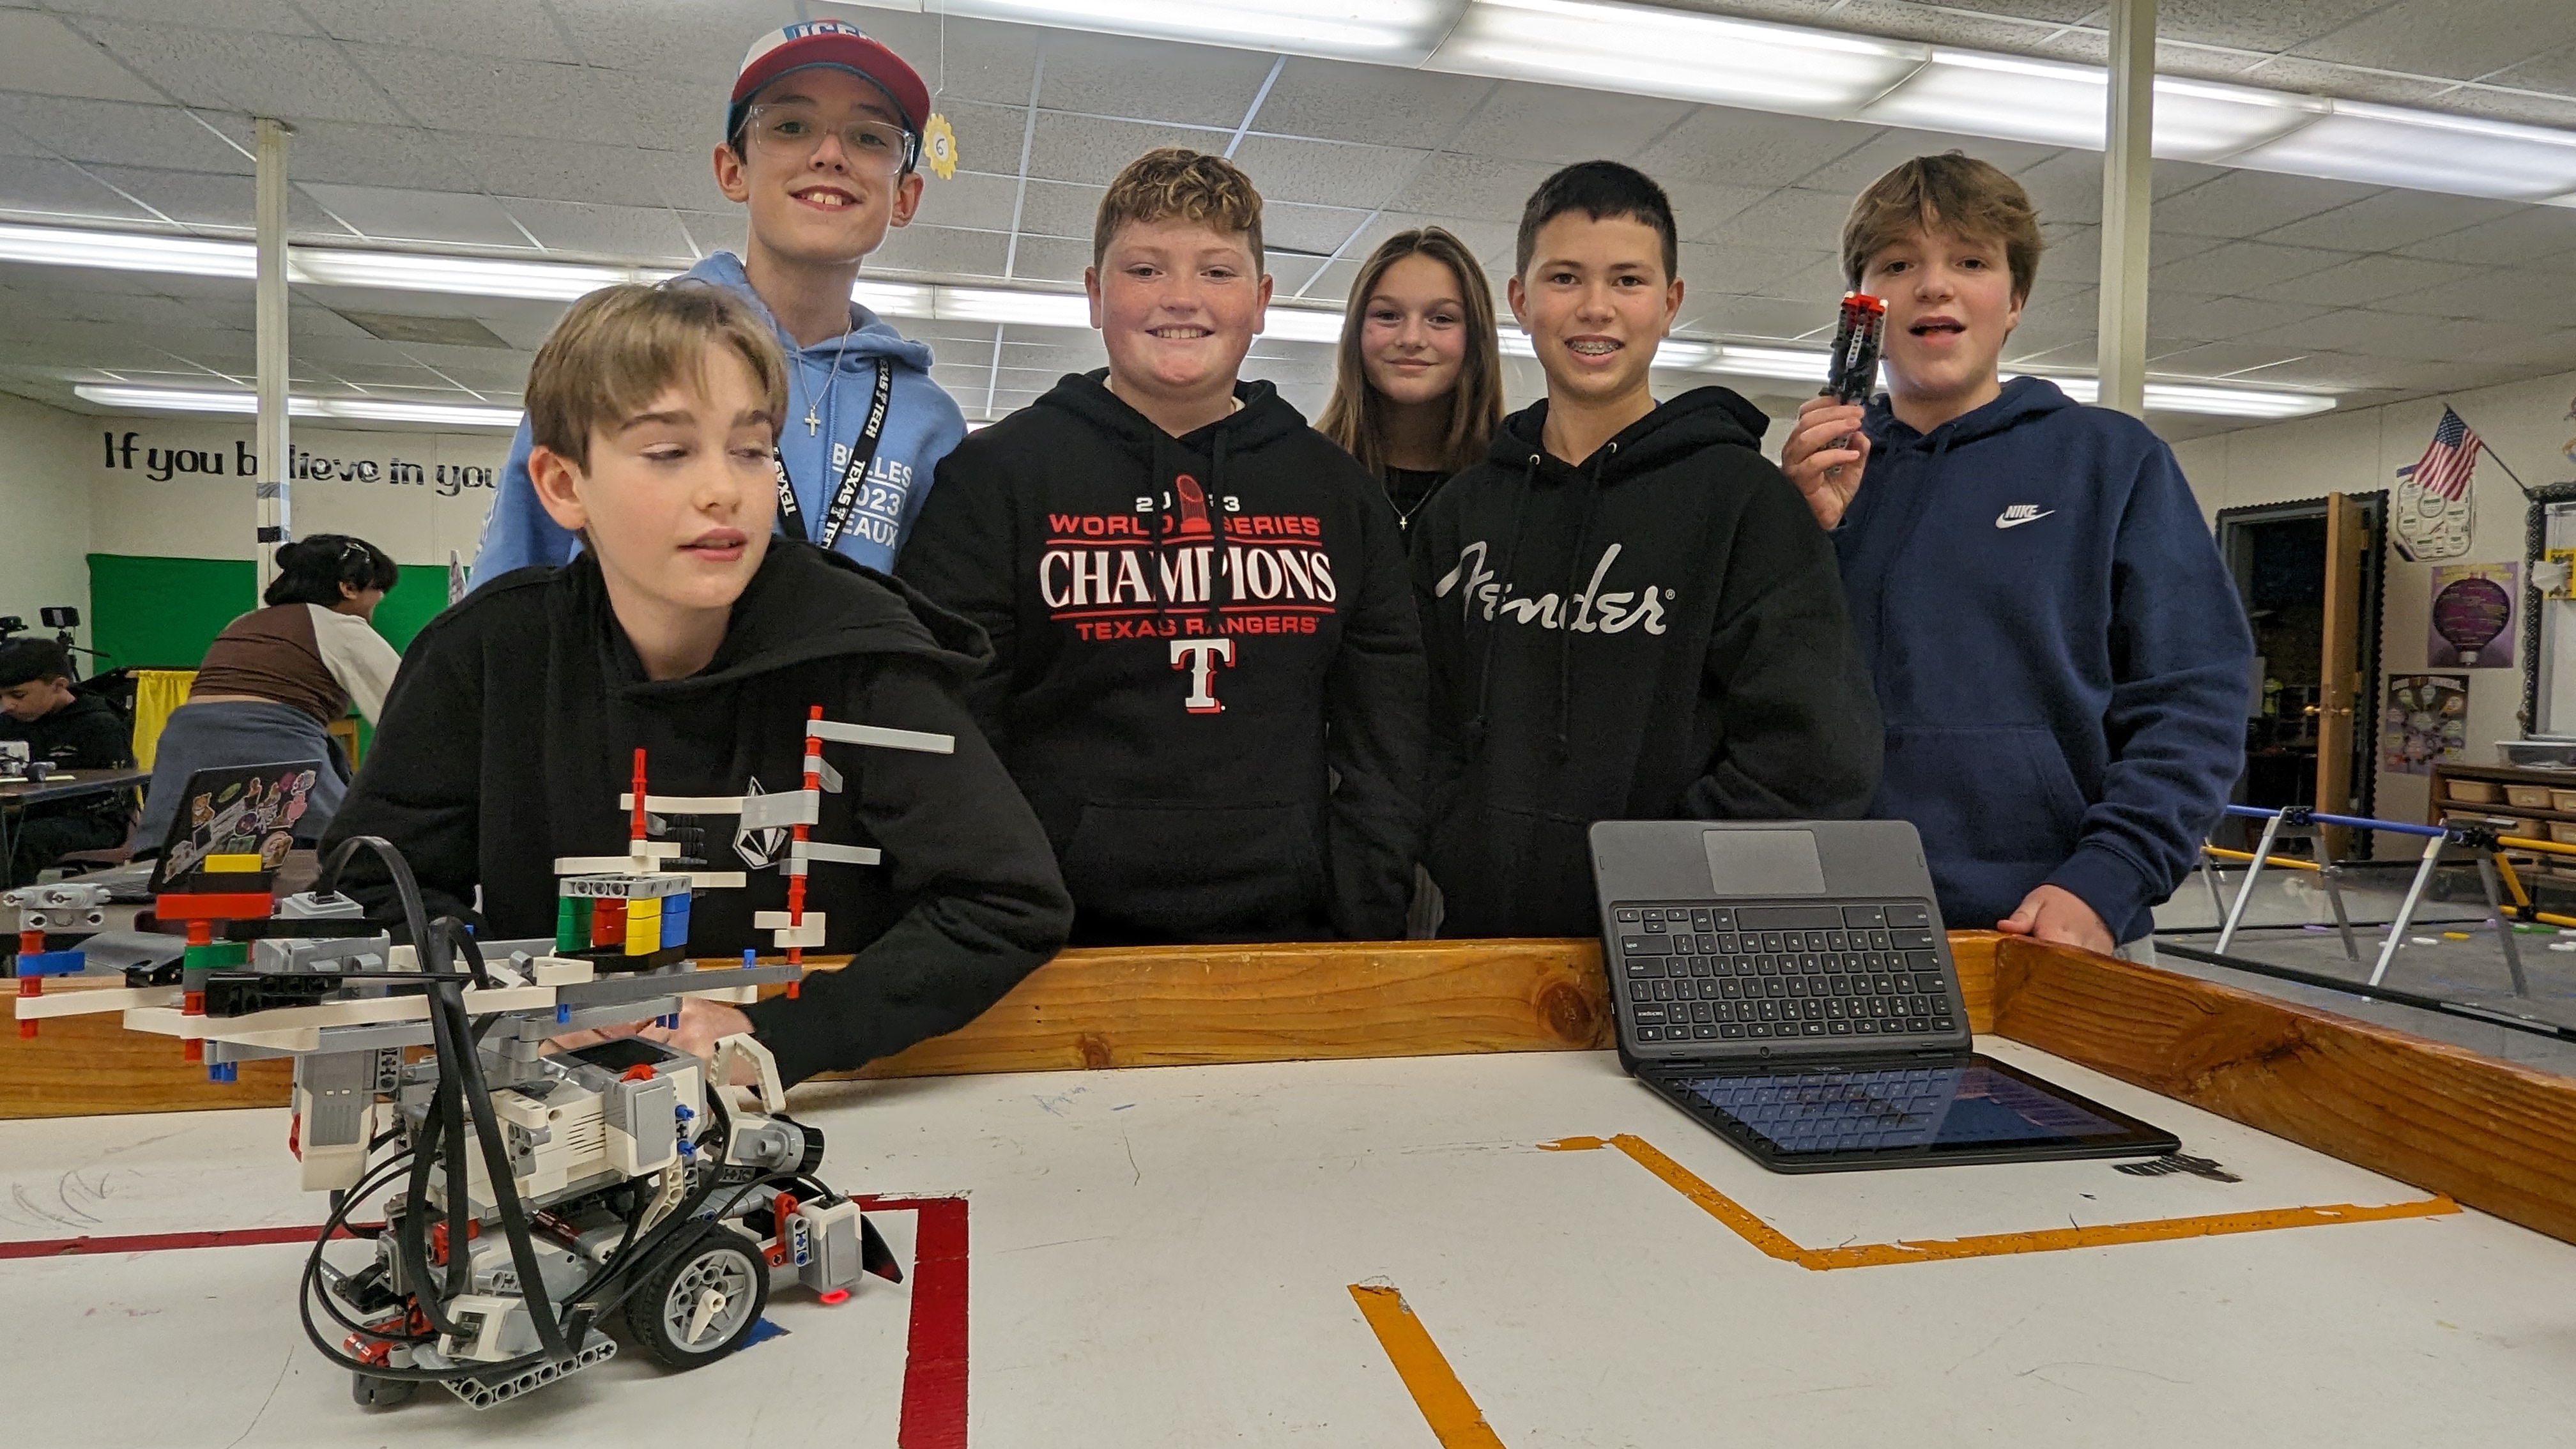 7th graders pose with their EV3 Lego robot for Sumobot project